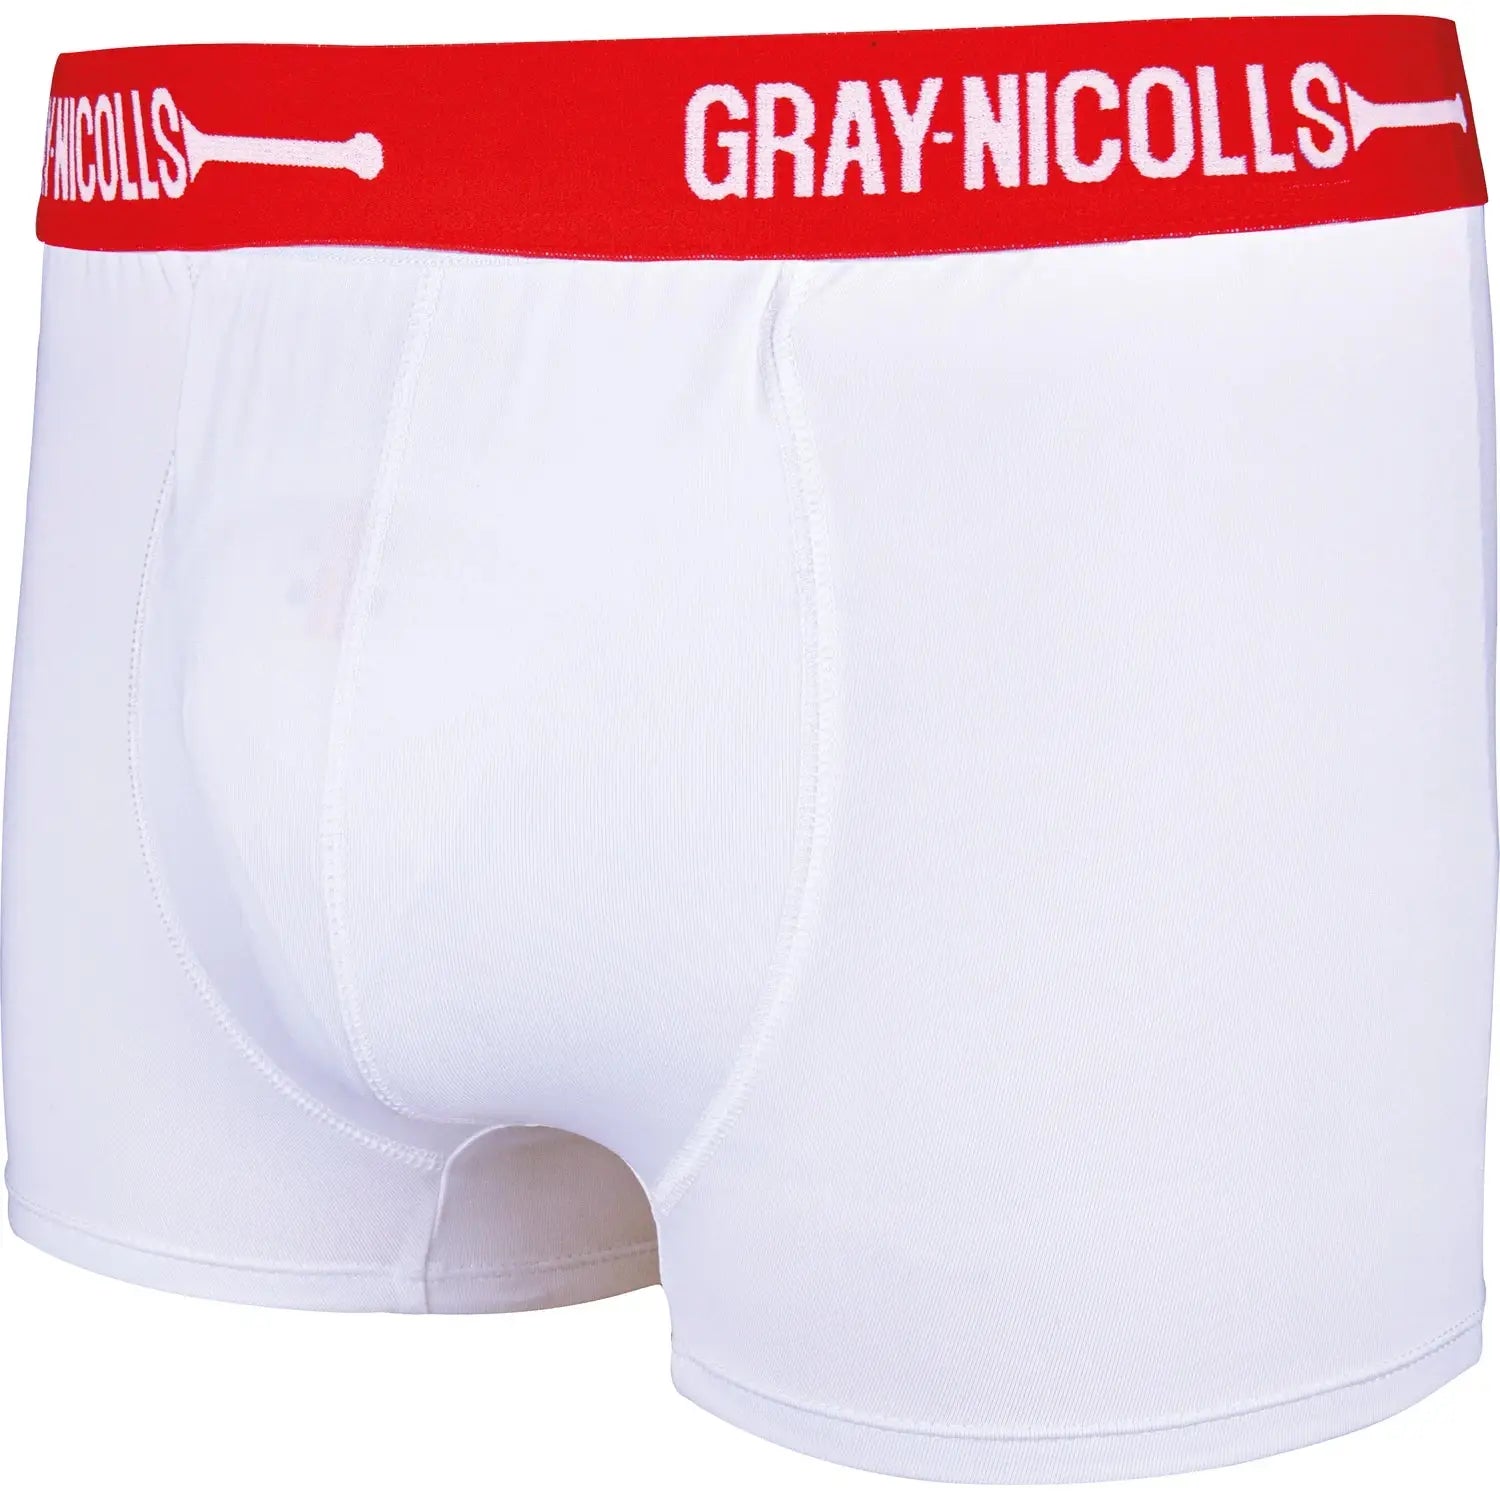 Gray-Nicolls Pro Cover Point Trunk Short with Pouch - Large - BODY PROTECTORS - SUPPORTERS